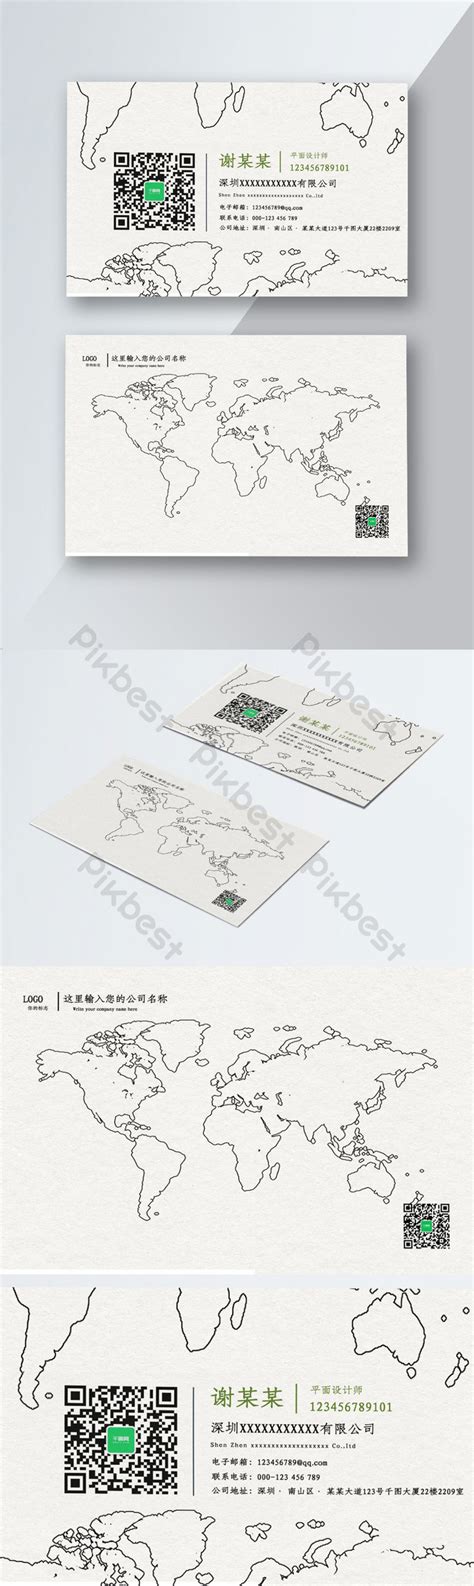 Simplicity Is A World Map Business Card Design Psd Free Download